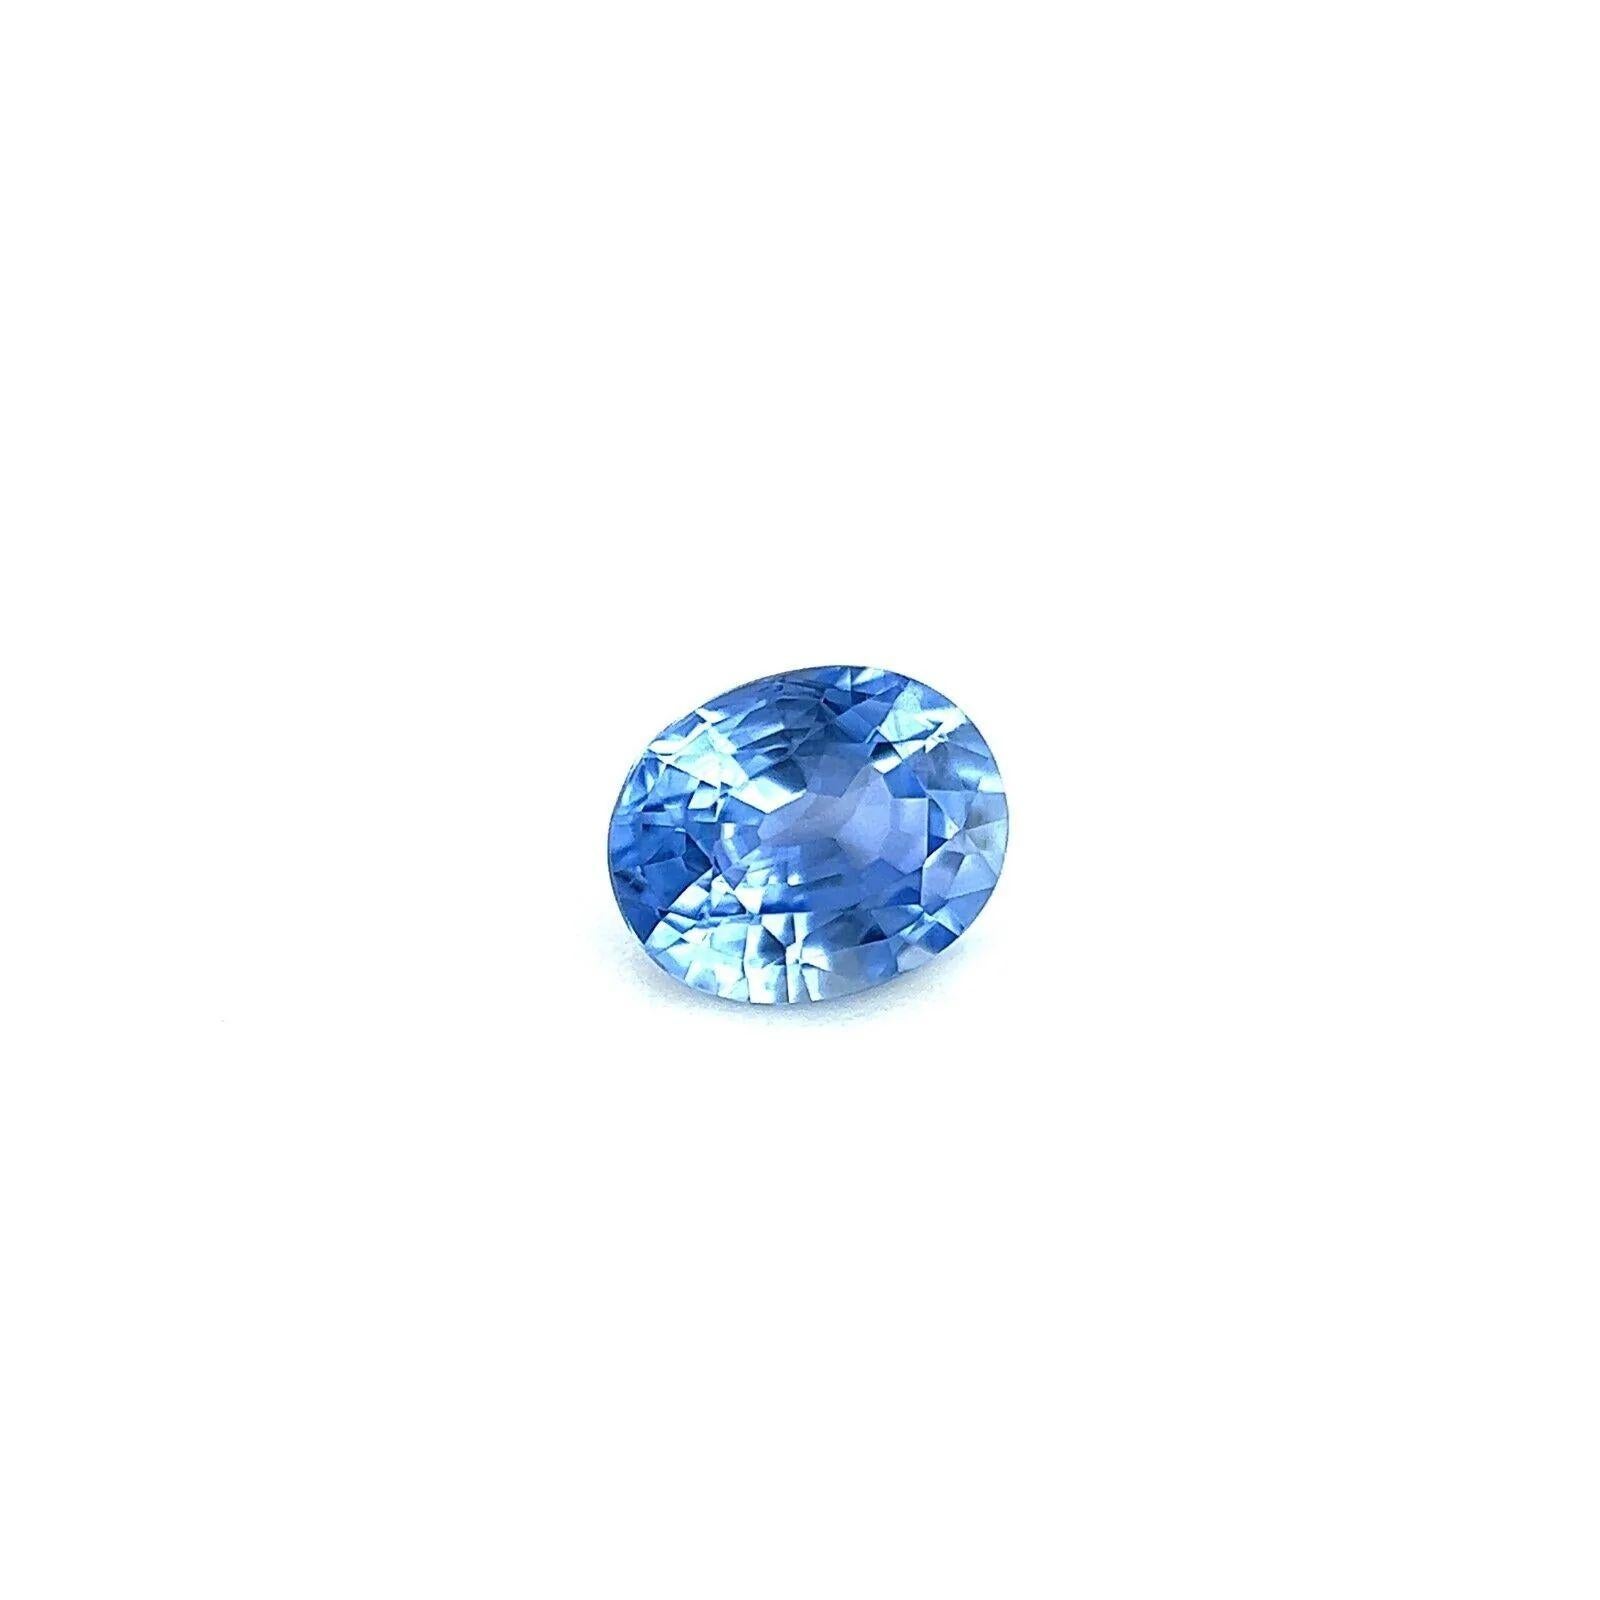 0.69ct Natural Vivid Ceylon Blue Sapphire Oval Cut Sri Lanka Gemstone 5.8x4.7mm

Fine Natural Vivid Blue Ceylon Sapphire Gemstone.
0.69 Carat with a beautiful vivid blue colour and very good clarity, a very clean stone.
Also has an excellent oval